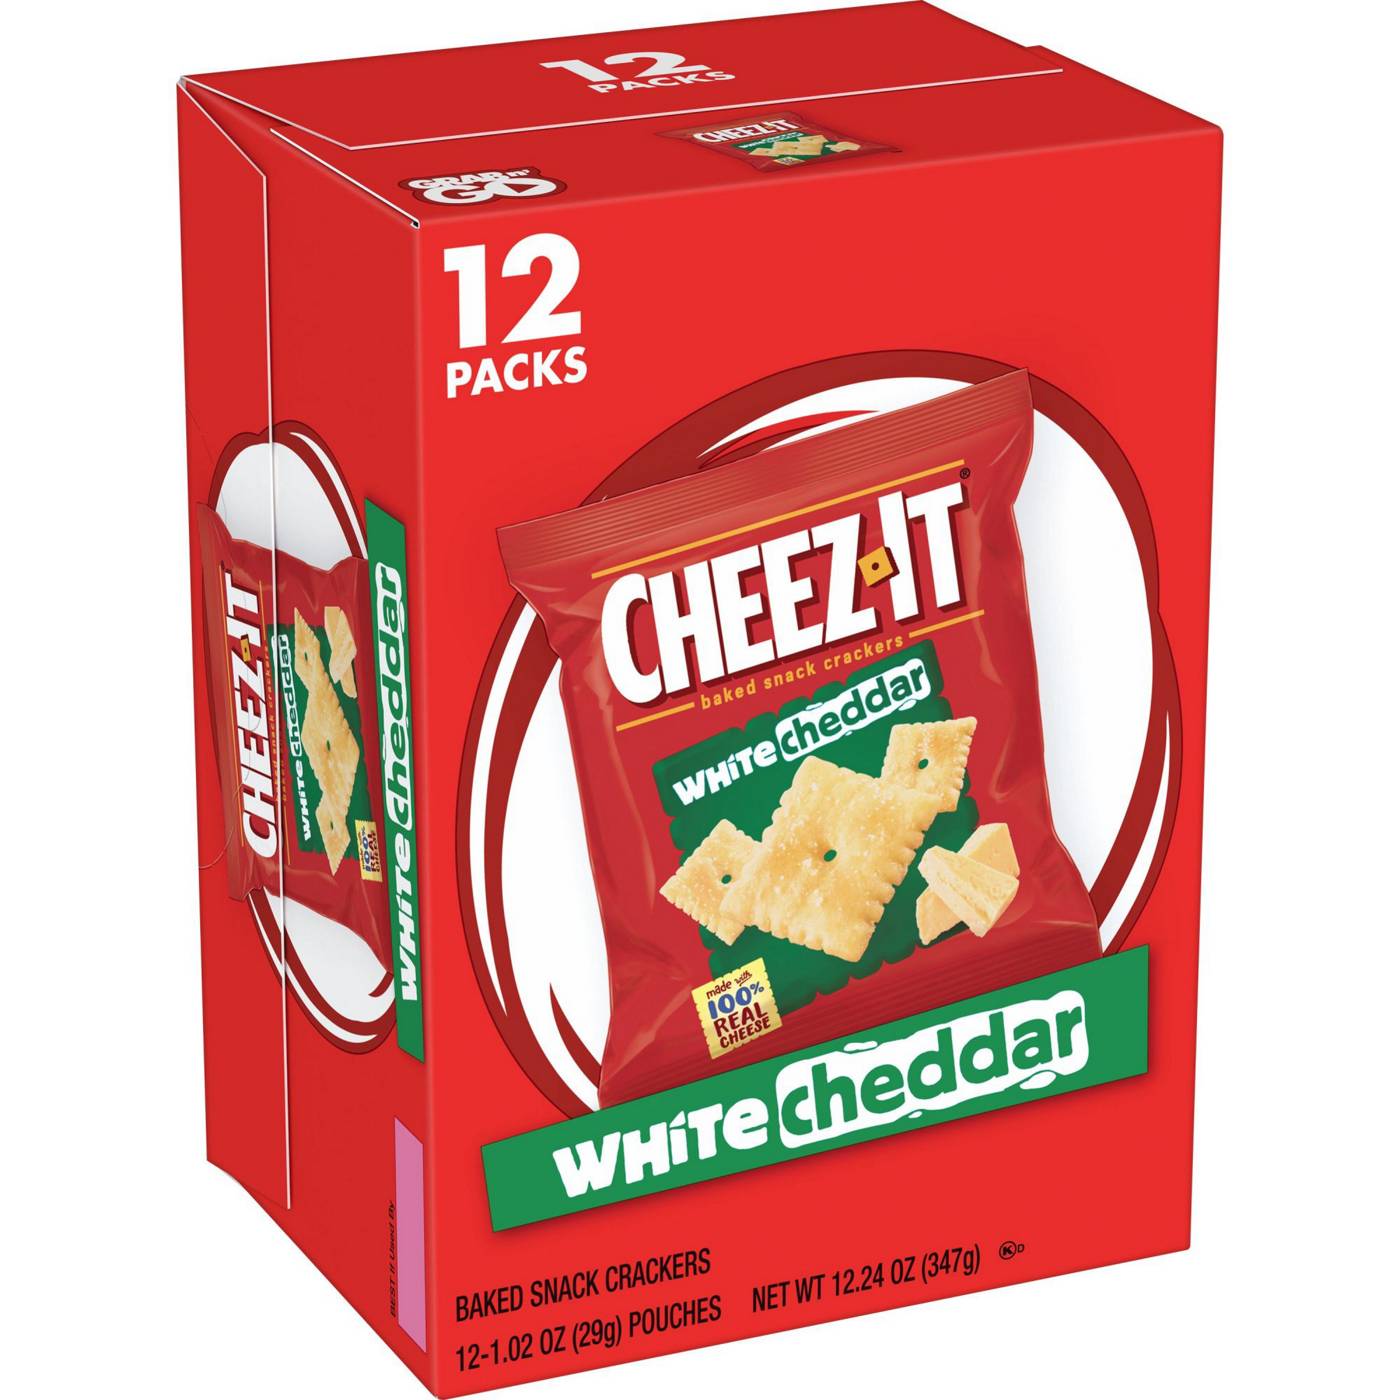 Cheez-It White Cheddar Baked Snack Crackers, 12.24 oz; image 4 of 5